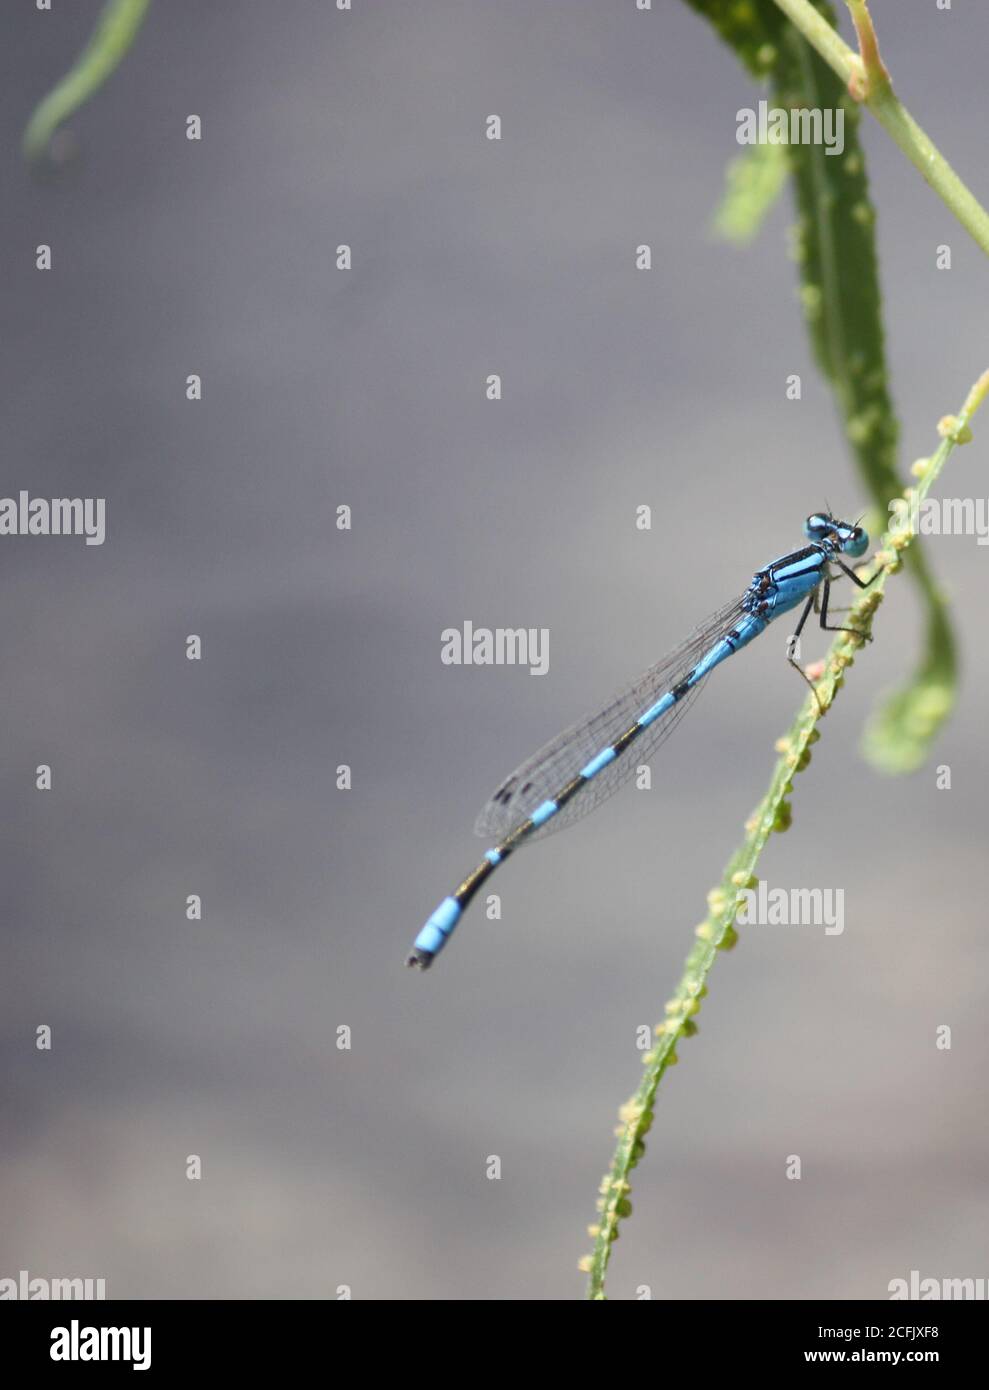 Closeup of a Common Blue Damselfly at peace, laying eggs and resting on the leaf of a pond plant Stock Photo